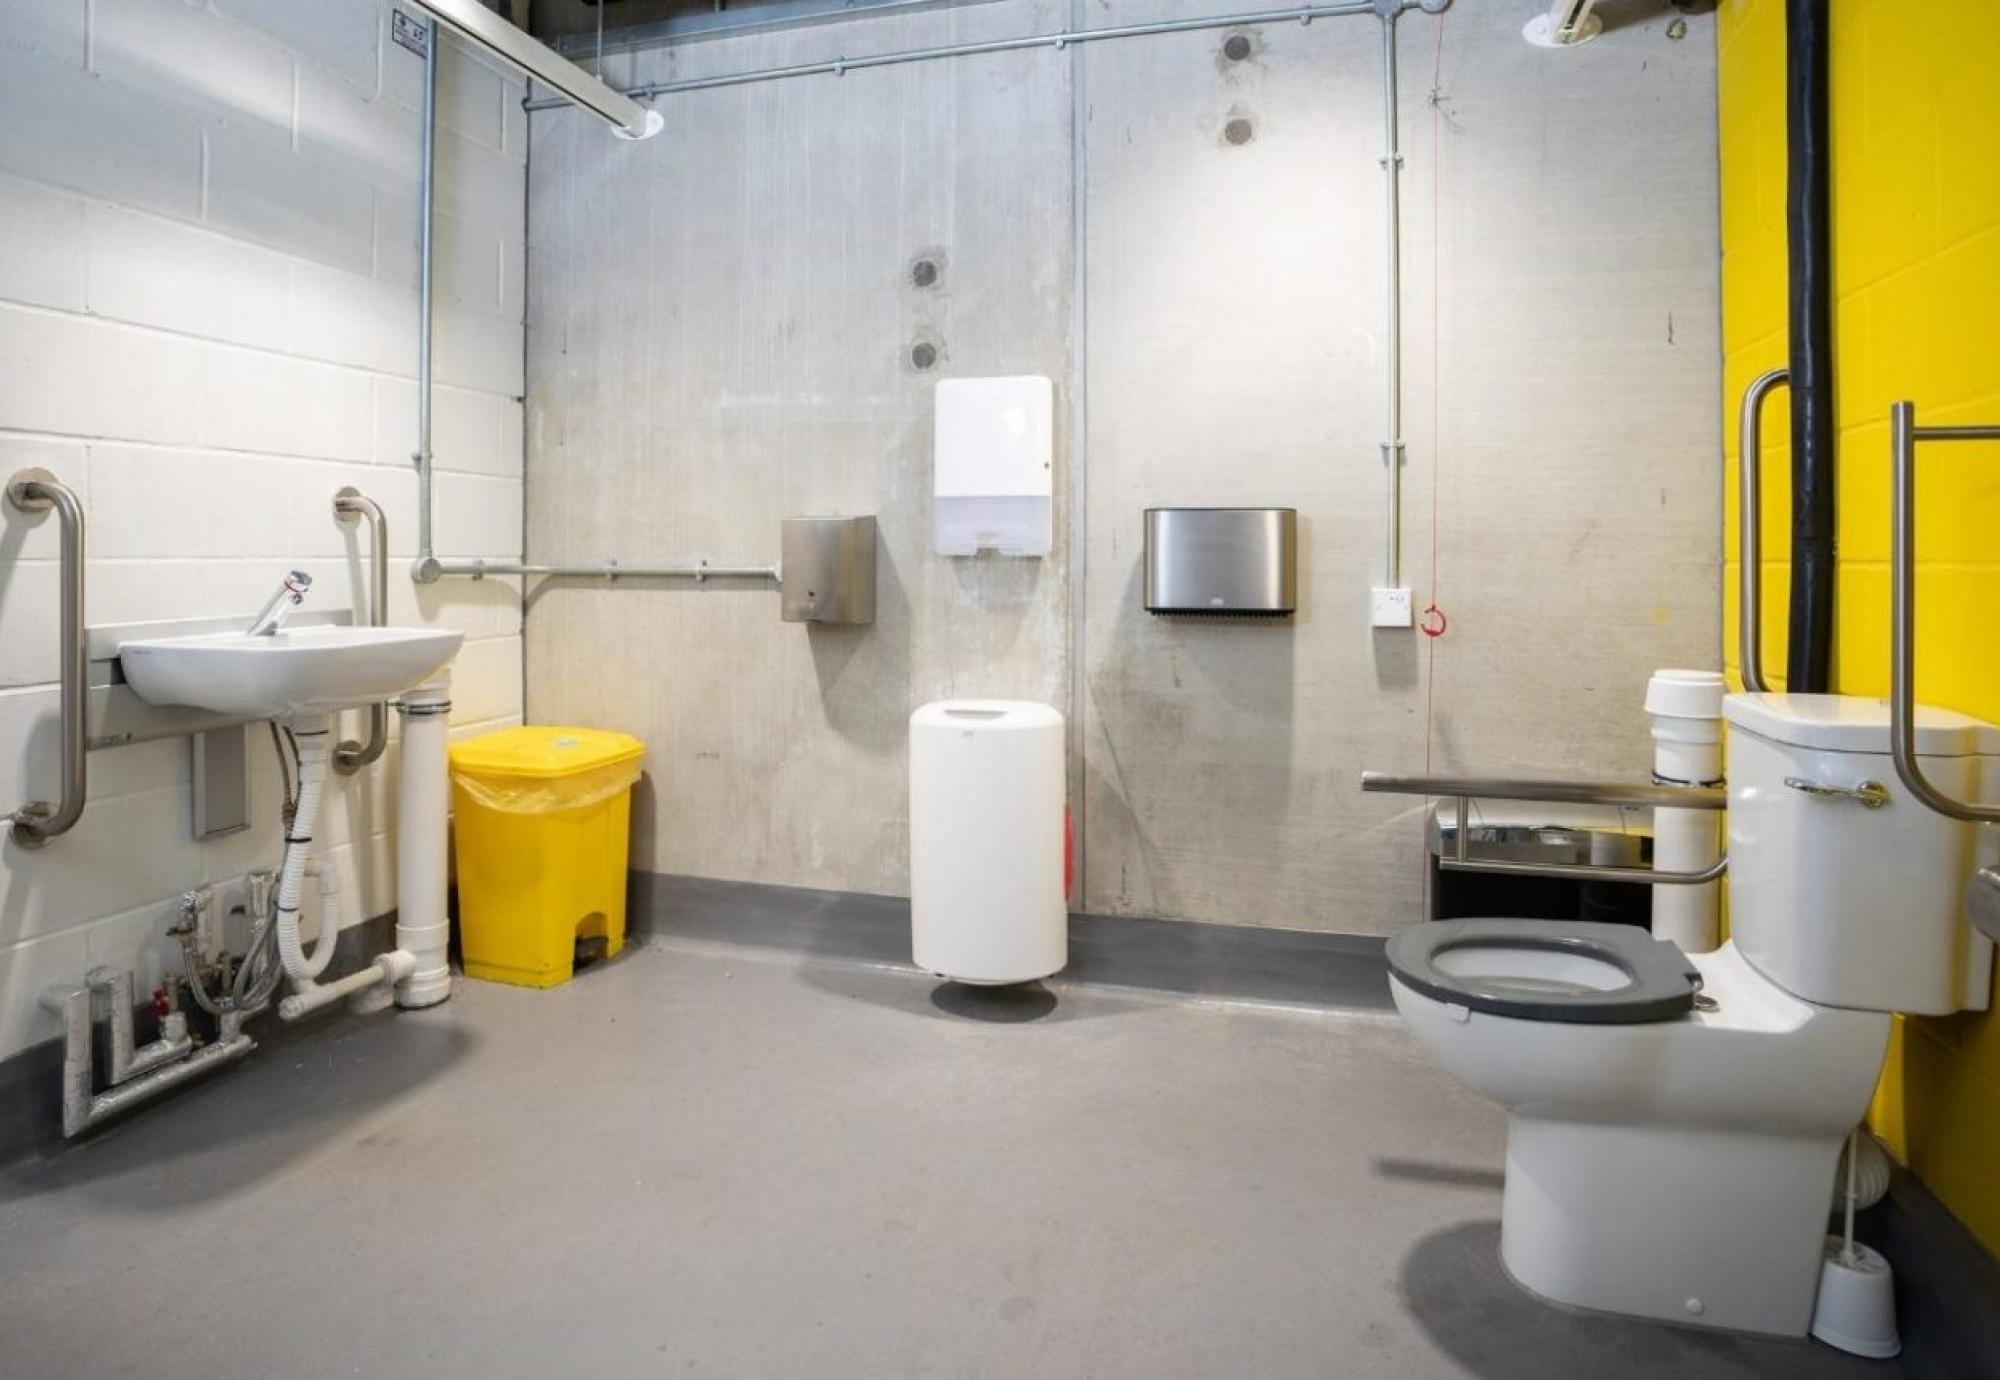 Accessible Changing Places facility at Lord's Cricket Ground